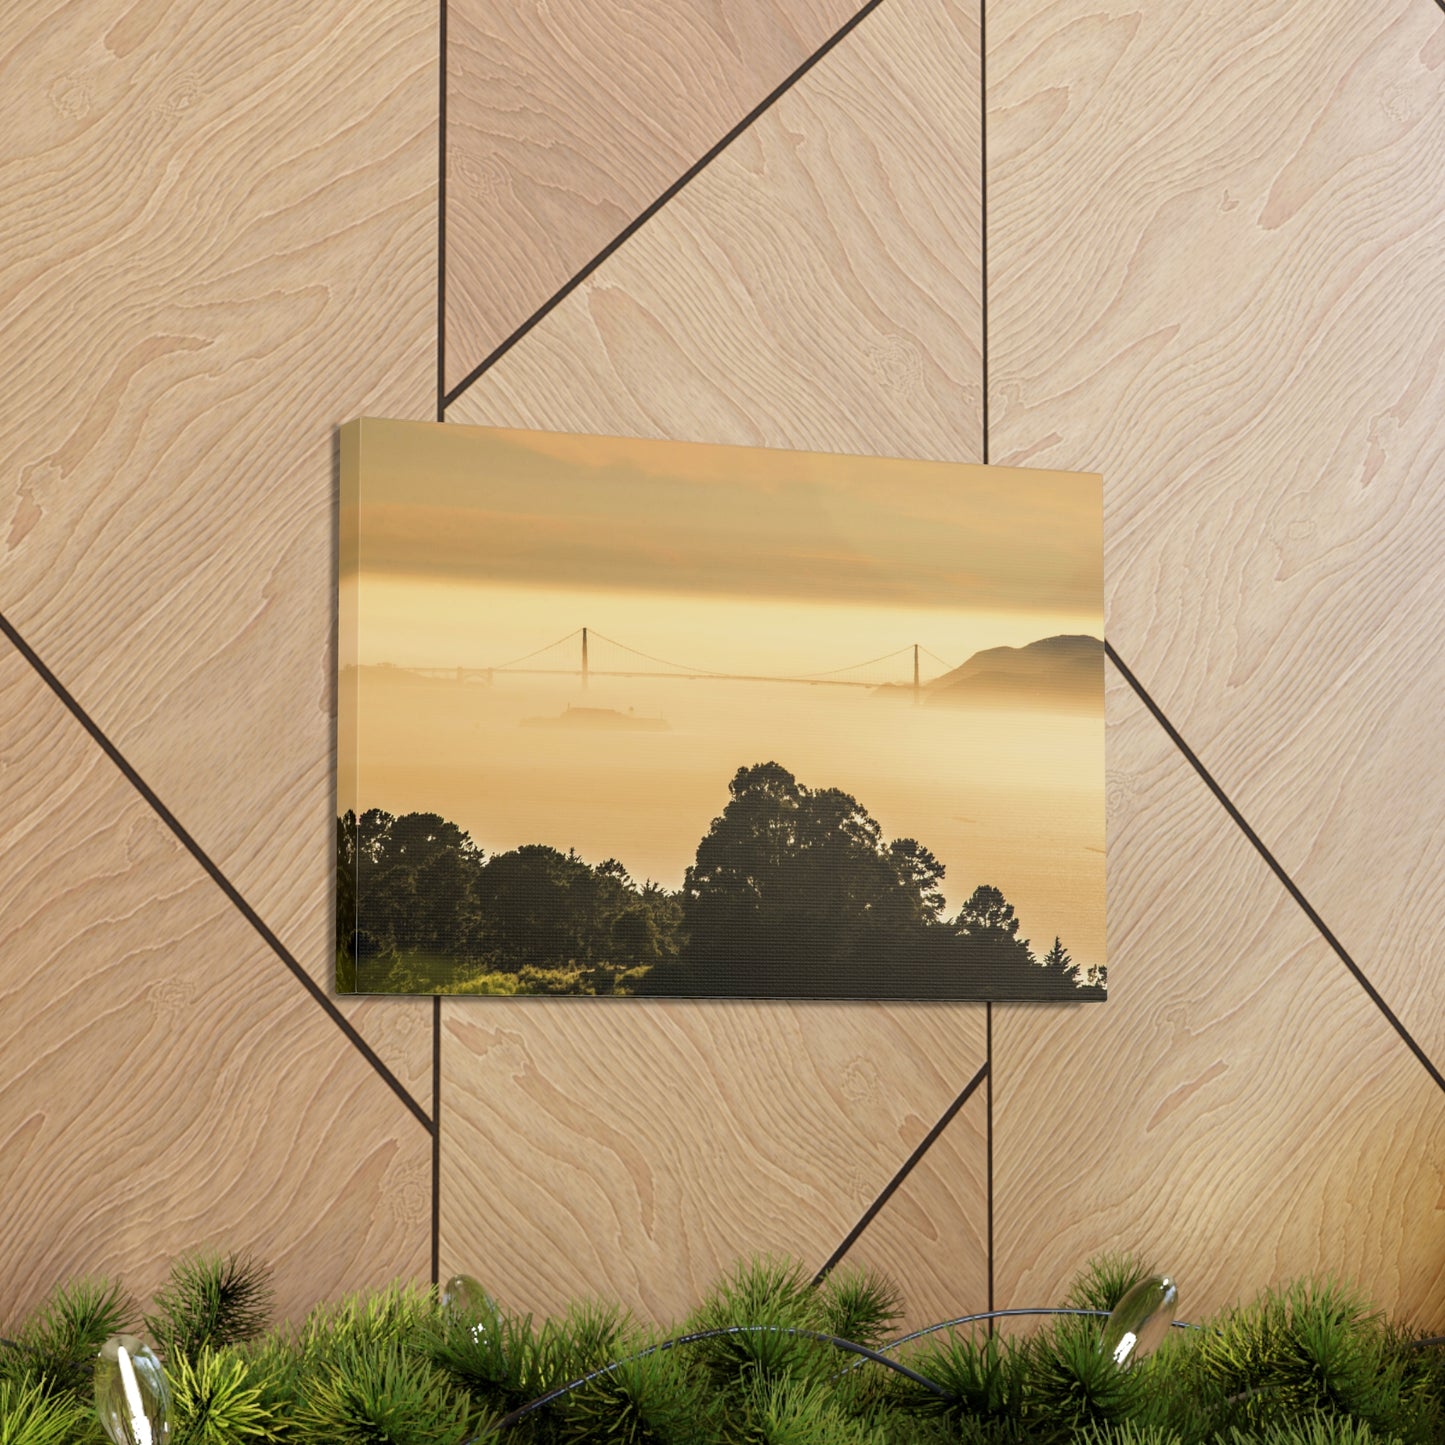 Canvas Print Of The Golden Gate Bridge And Trees In San Francisco In Fog For Wall Art